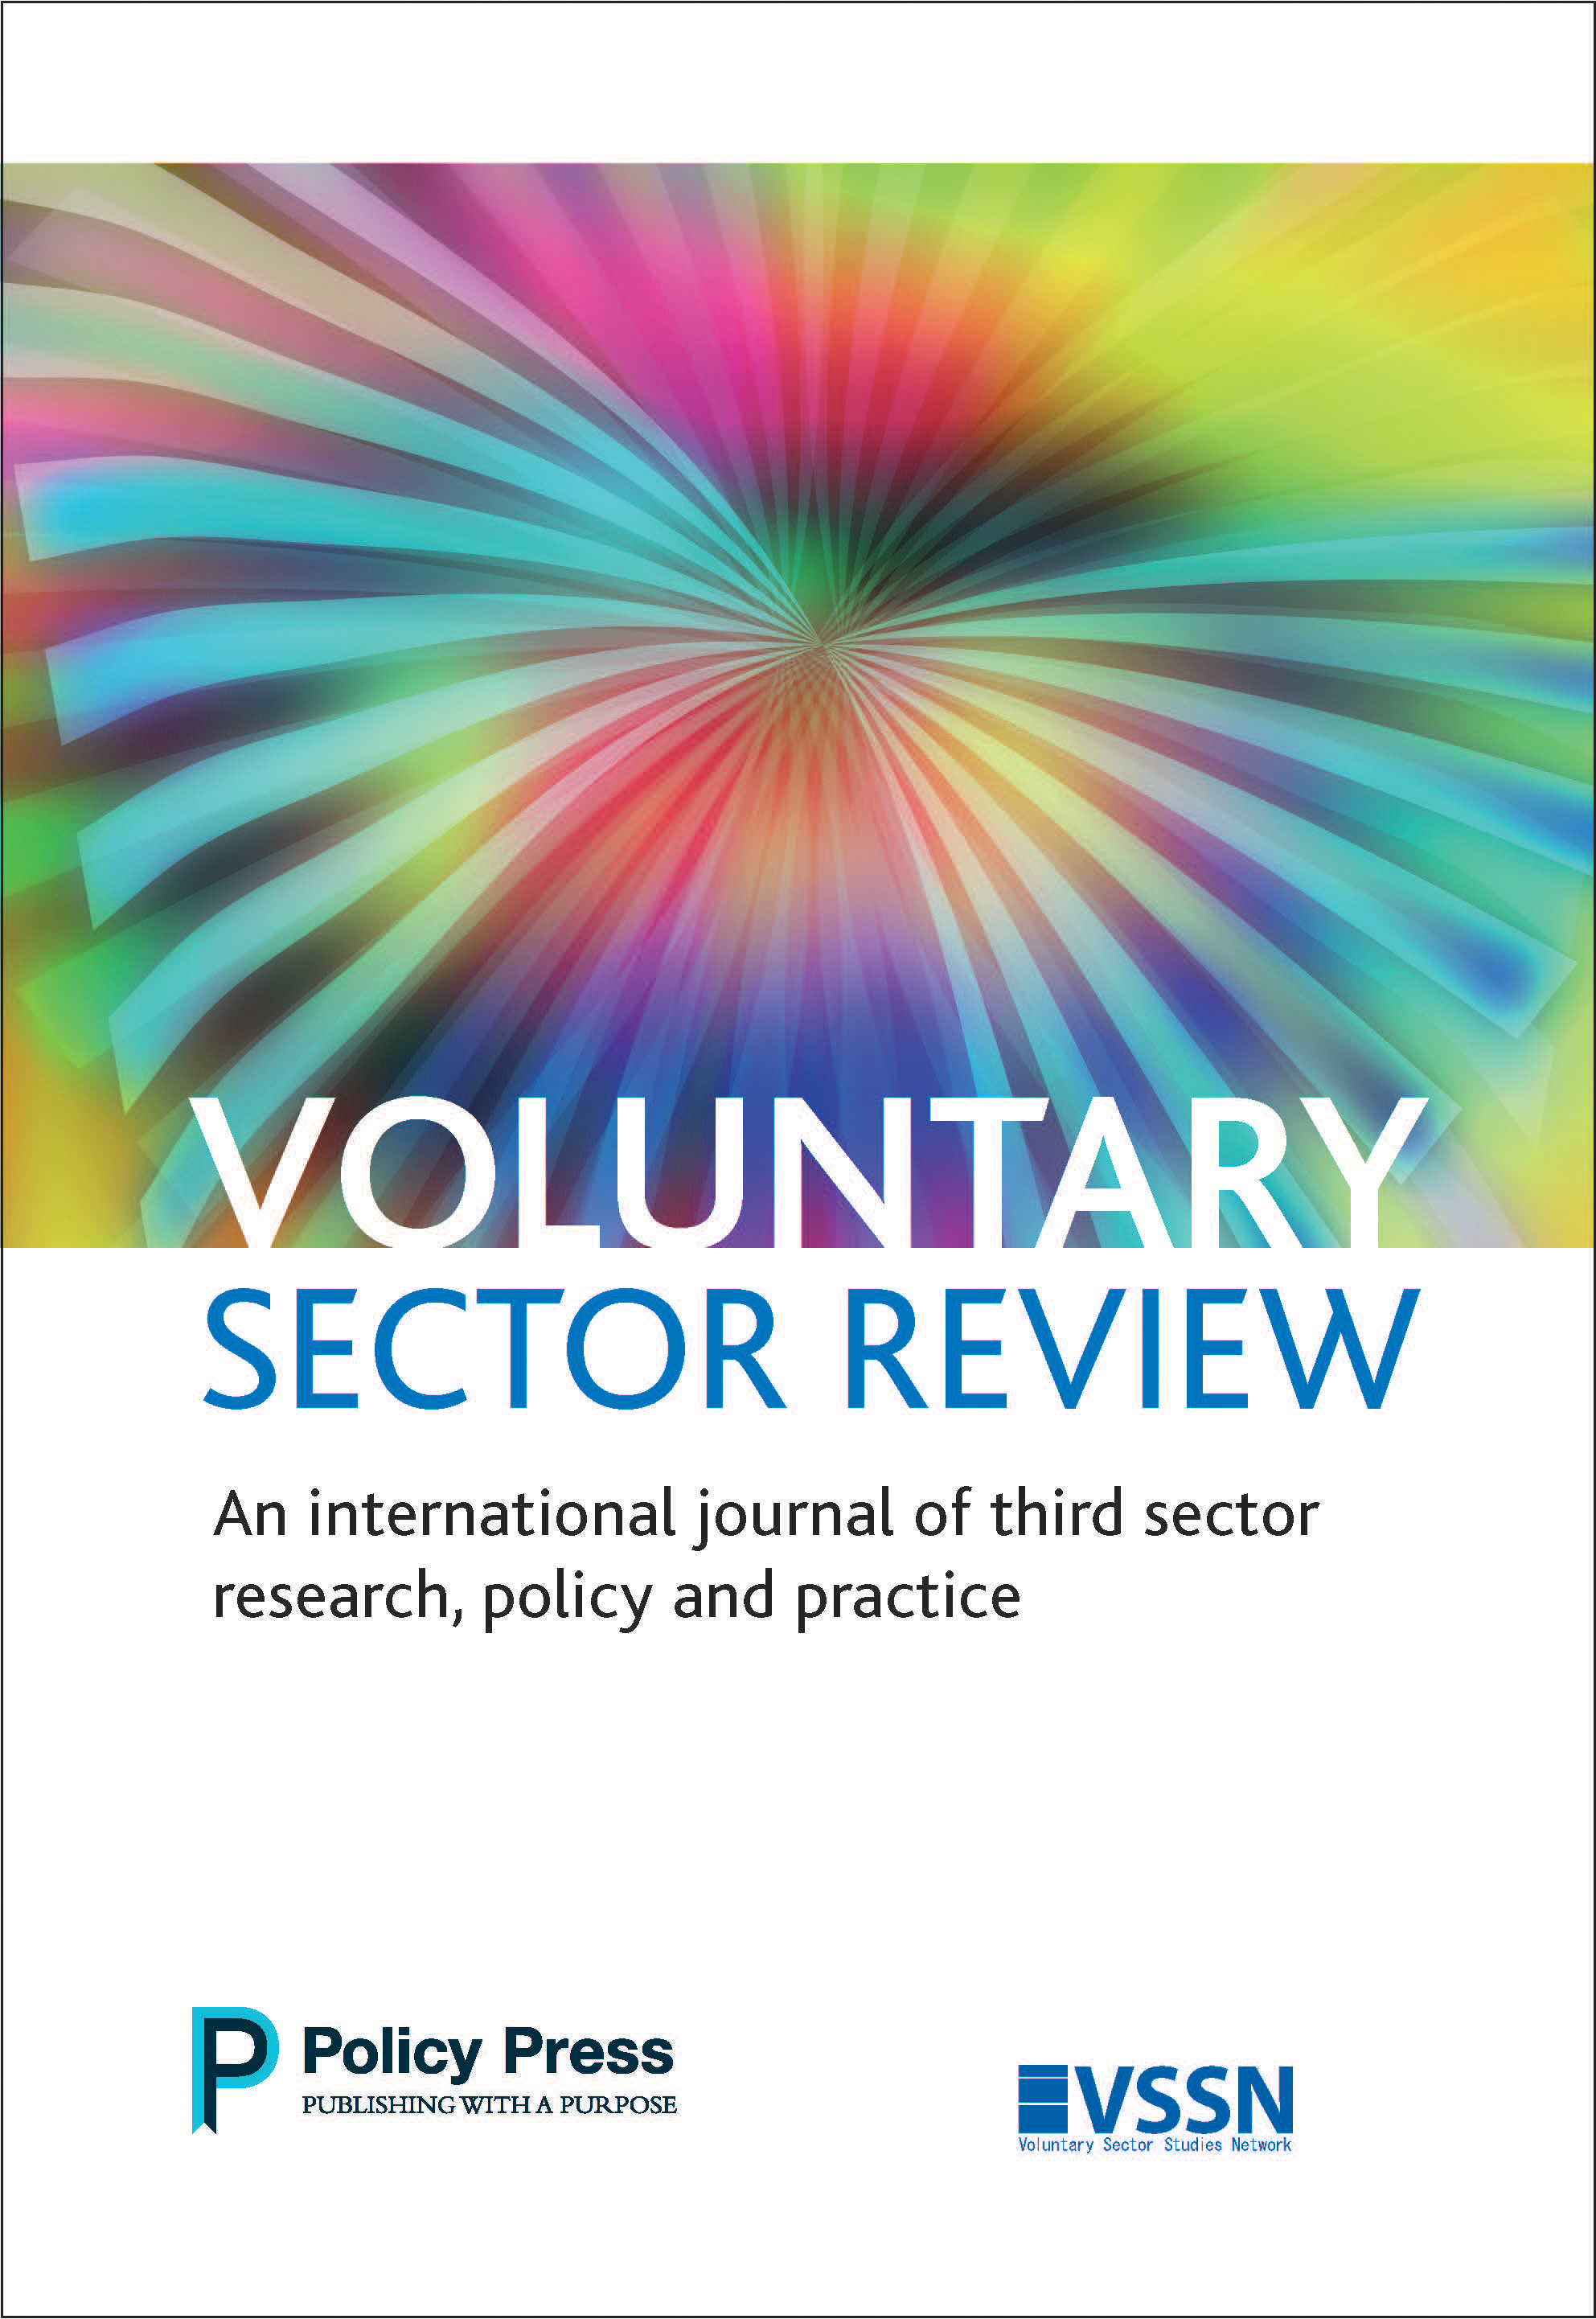 Voluntary sector review cover